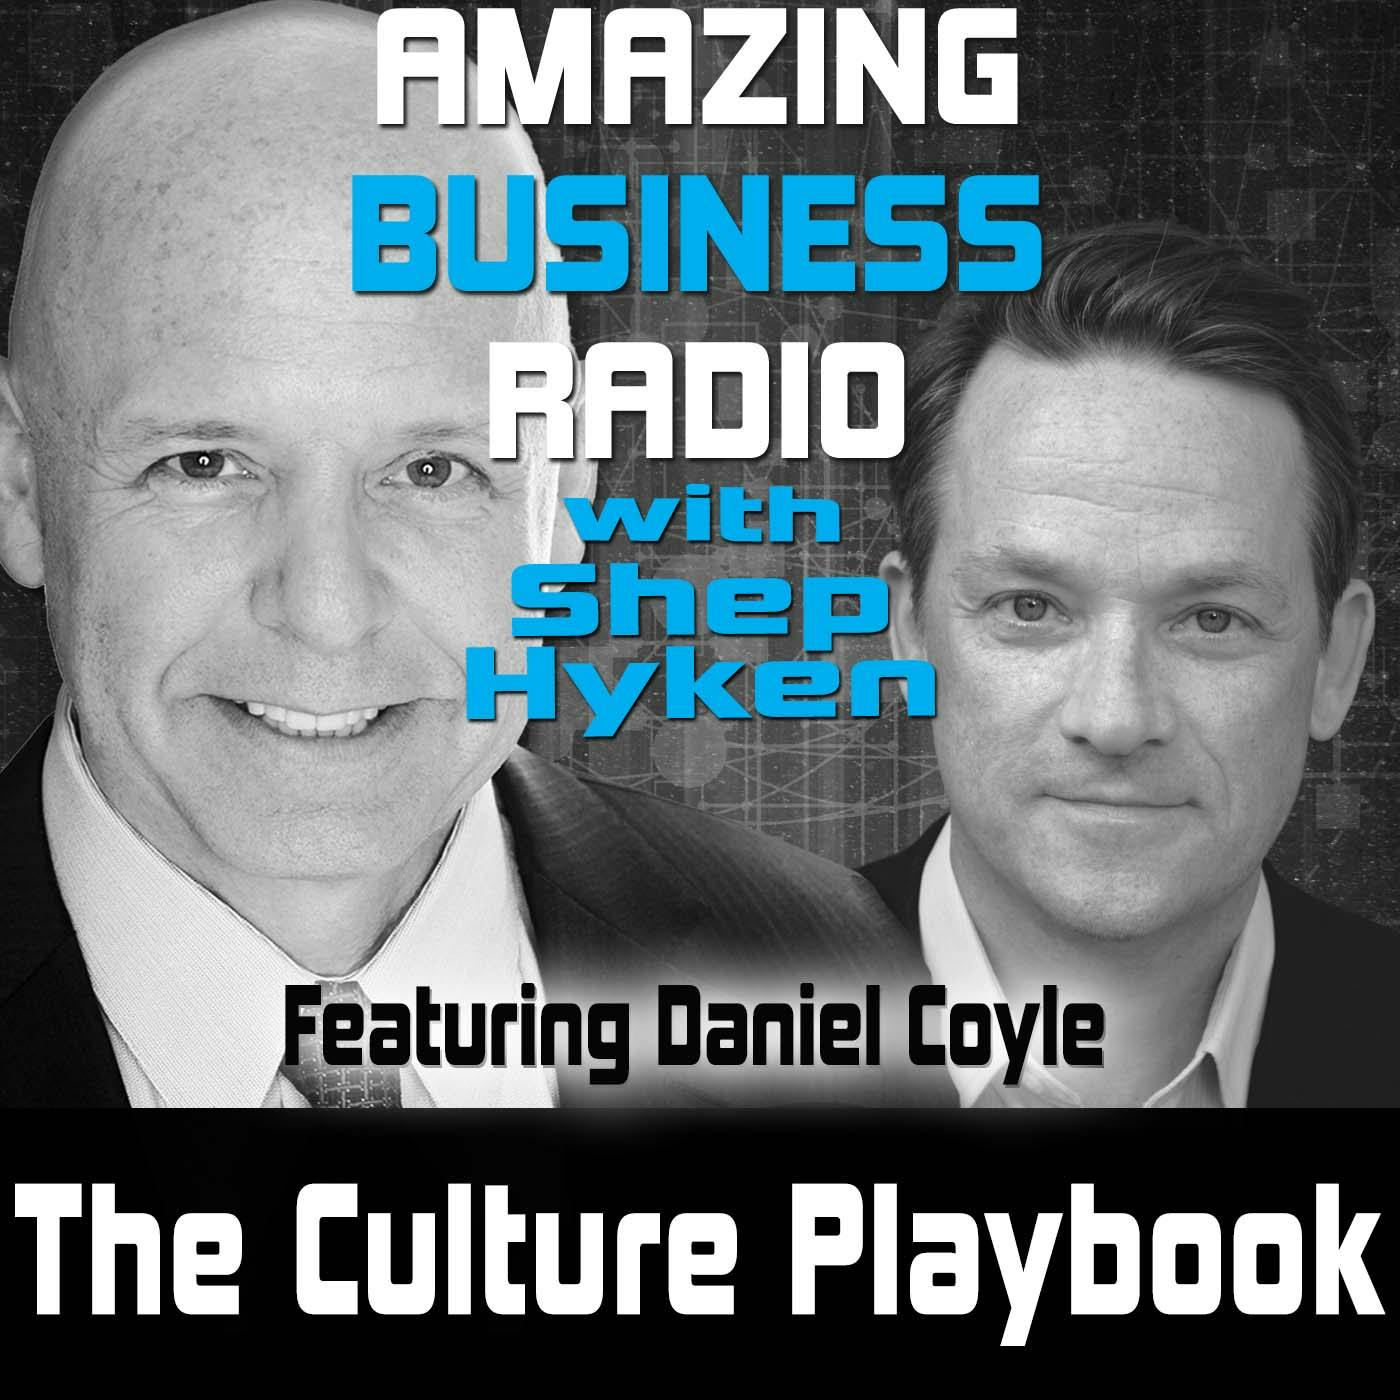 The Culture Playbook Featuring Daniel Coyle